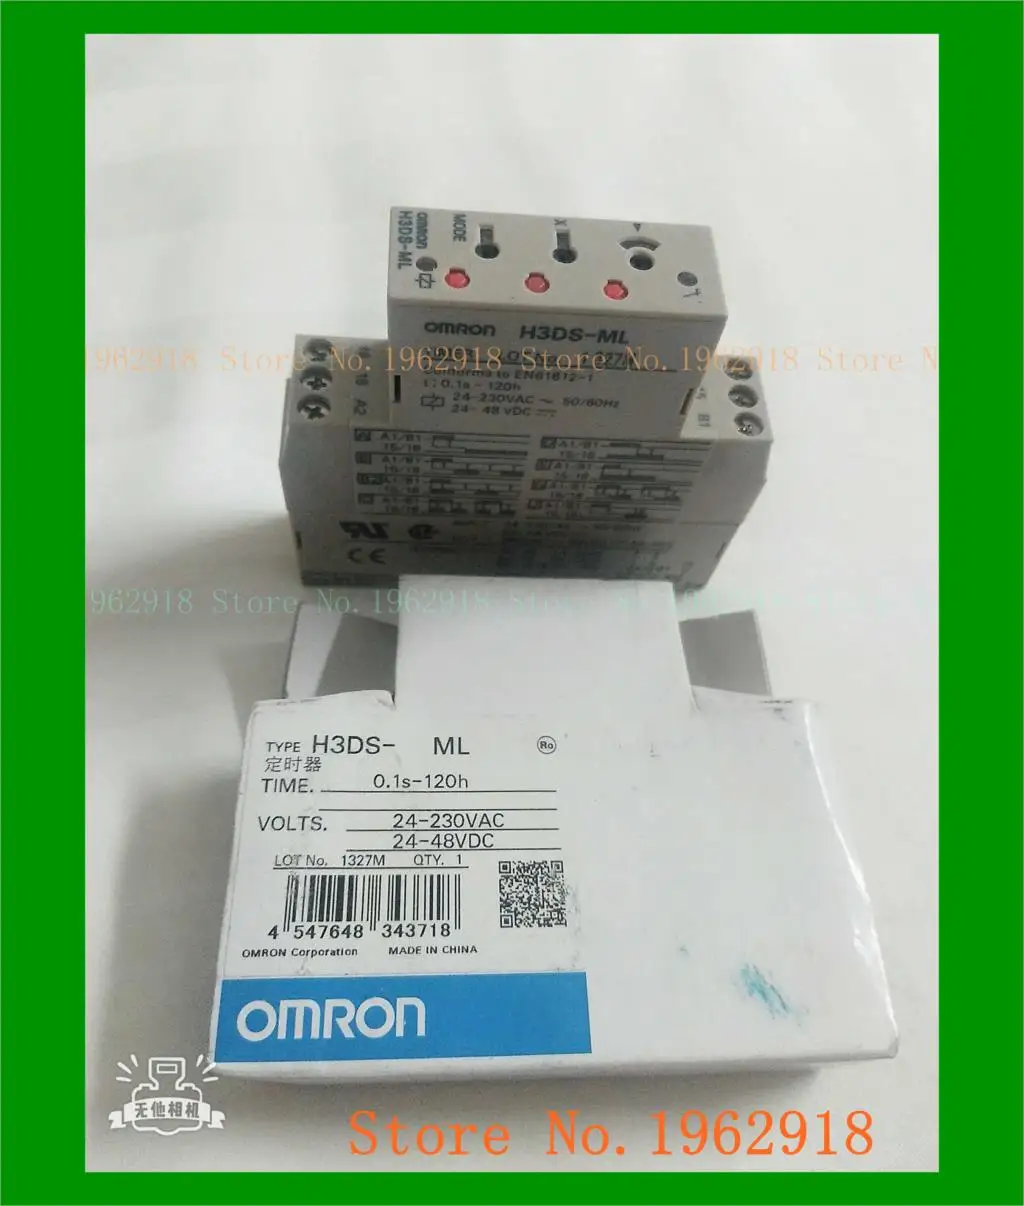 Omron h3ds-ml wiring diagram